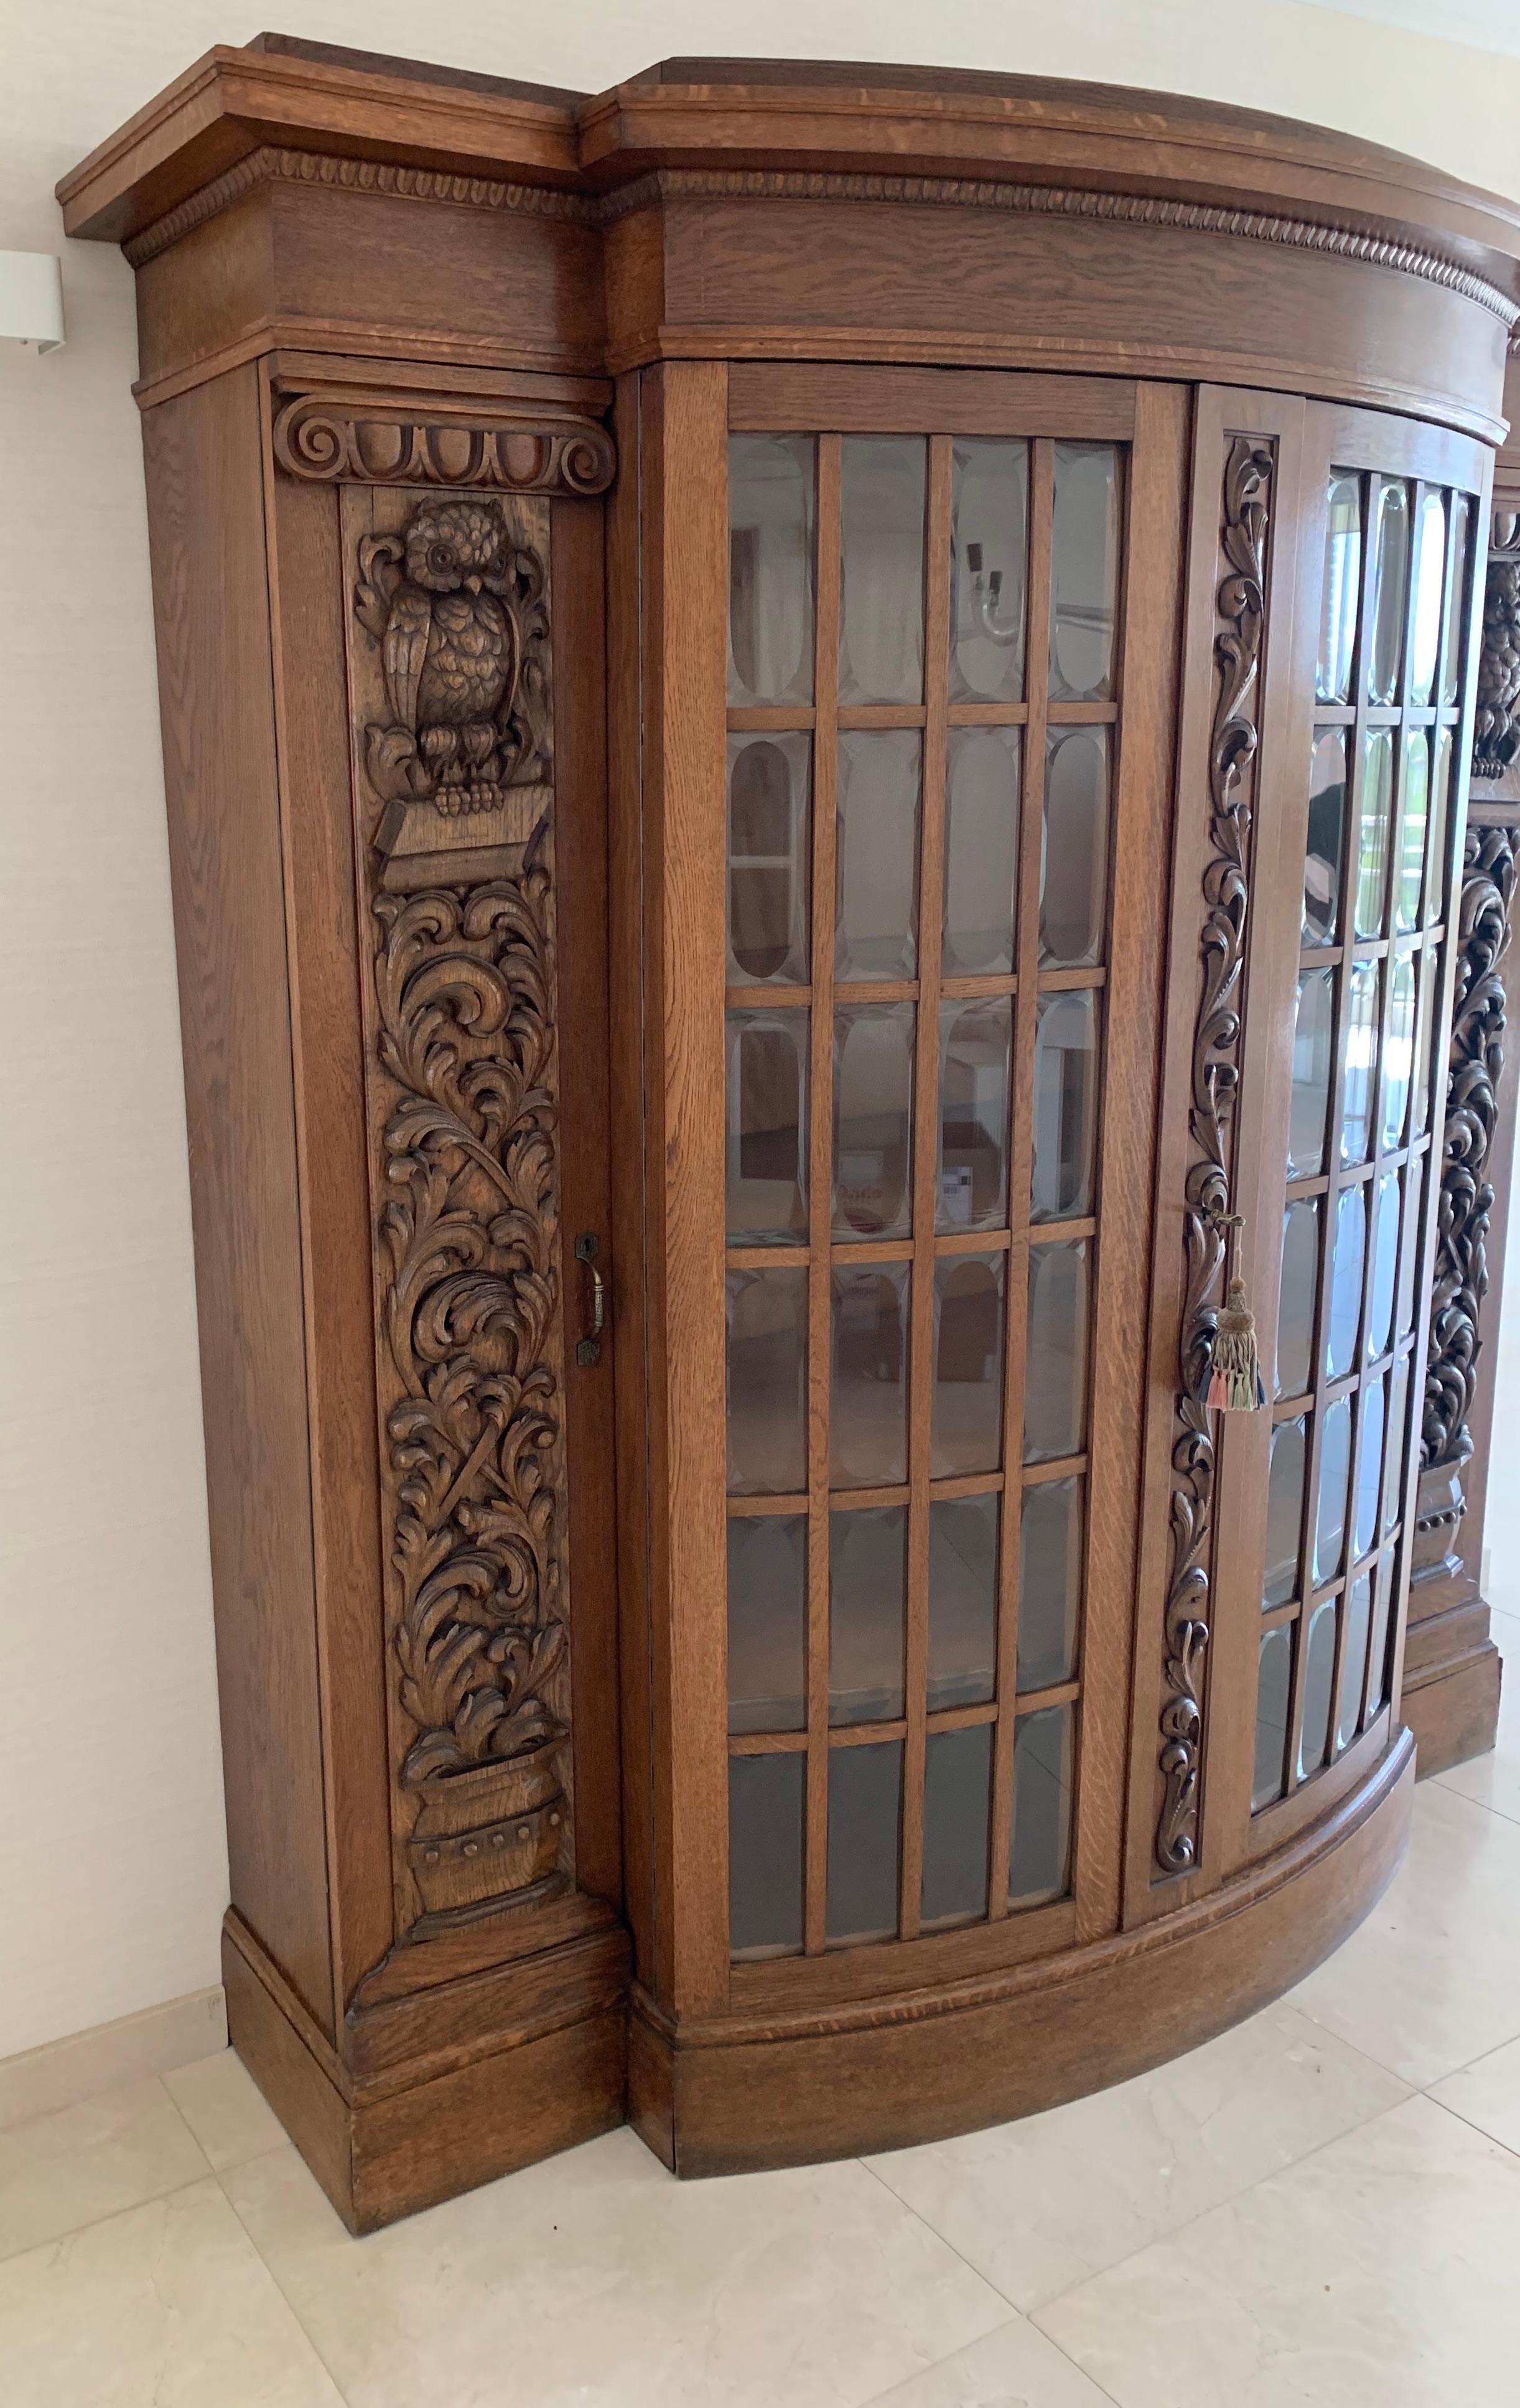 Beveled Antique Large & Meaningful Oak Bookcase / Vitrine Cabinet with Owl Sculptures  